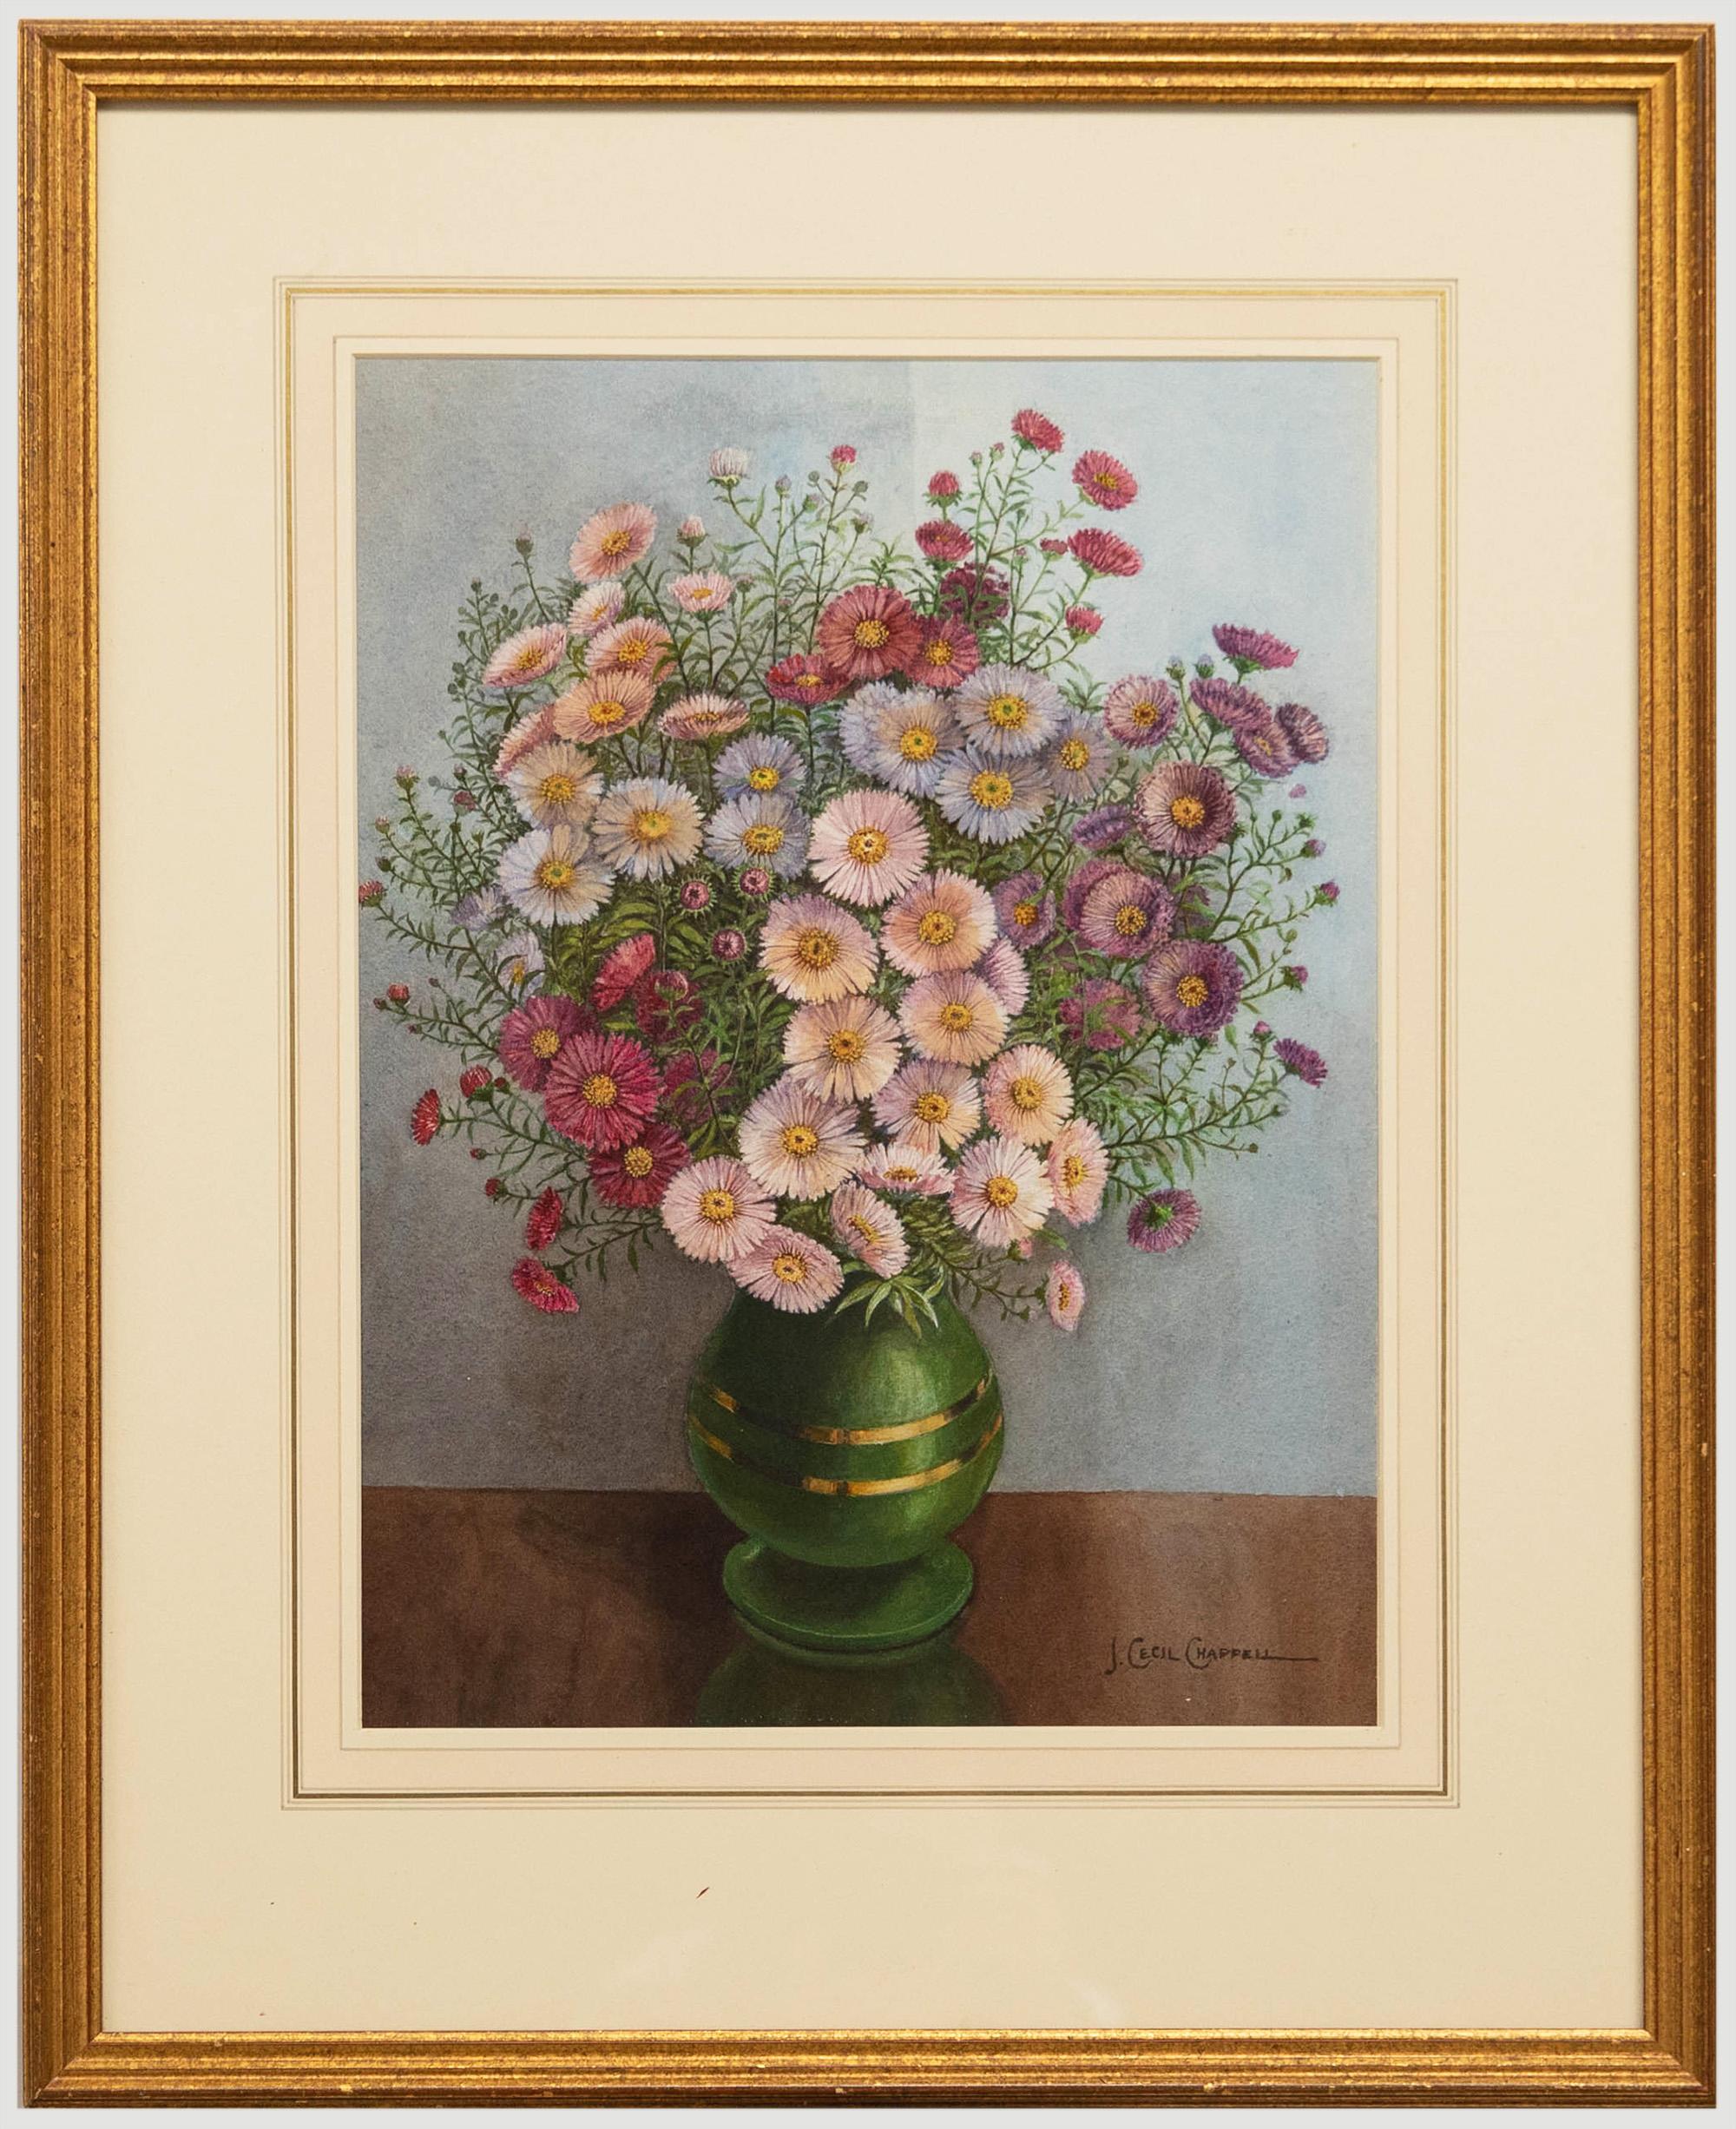 Unknown Still-Life - J. Cecil Chappell - 20th Century Watercolour, Asters